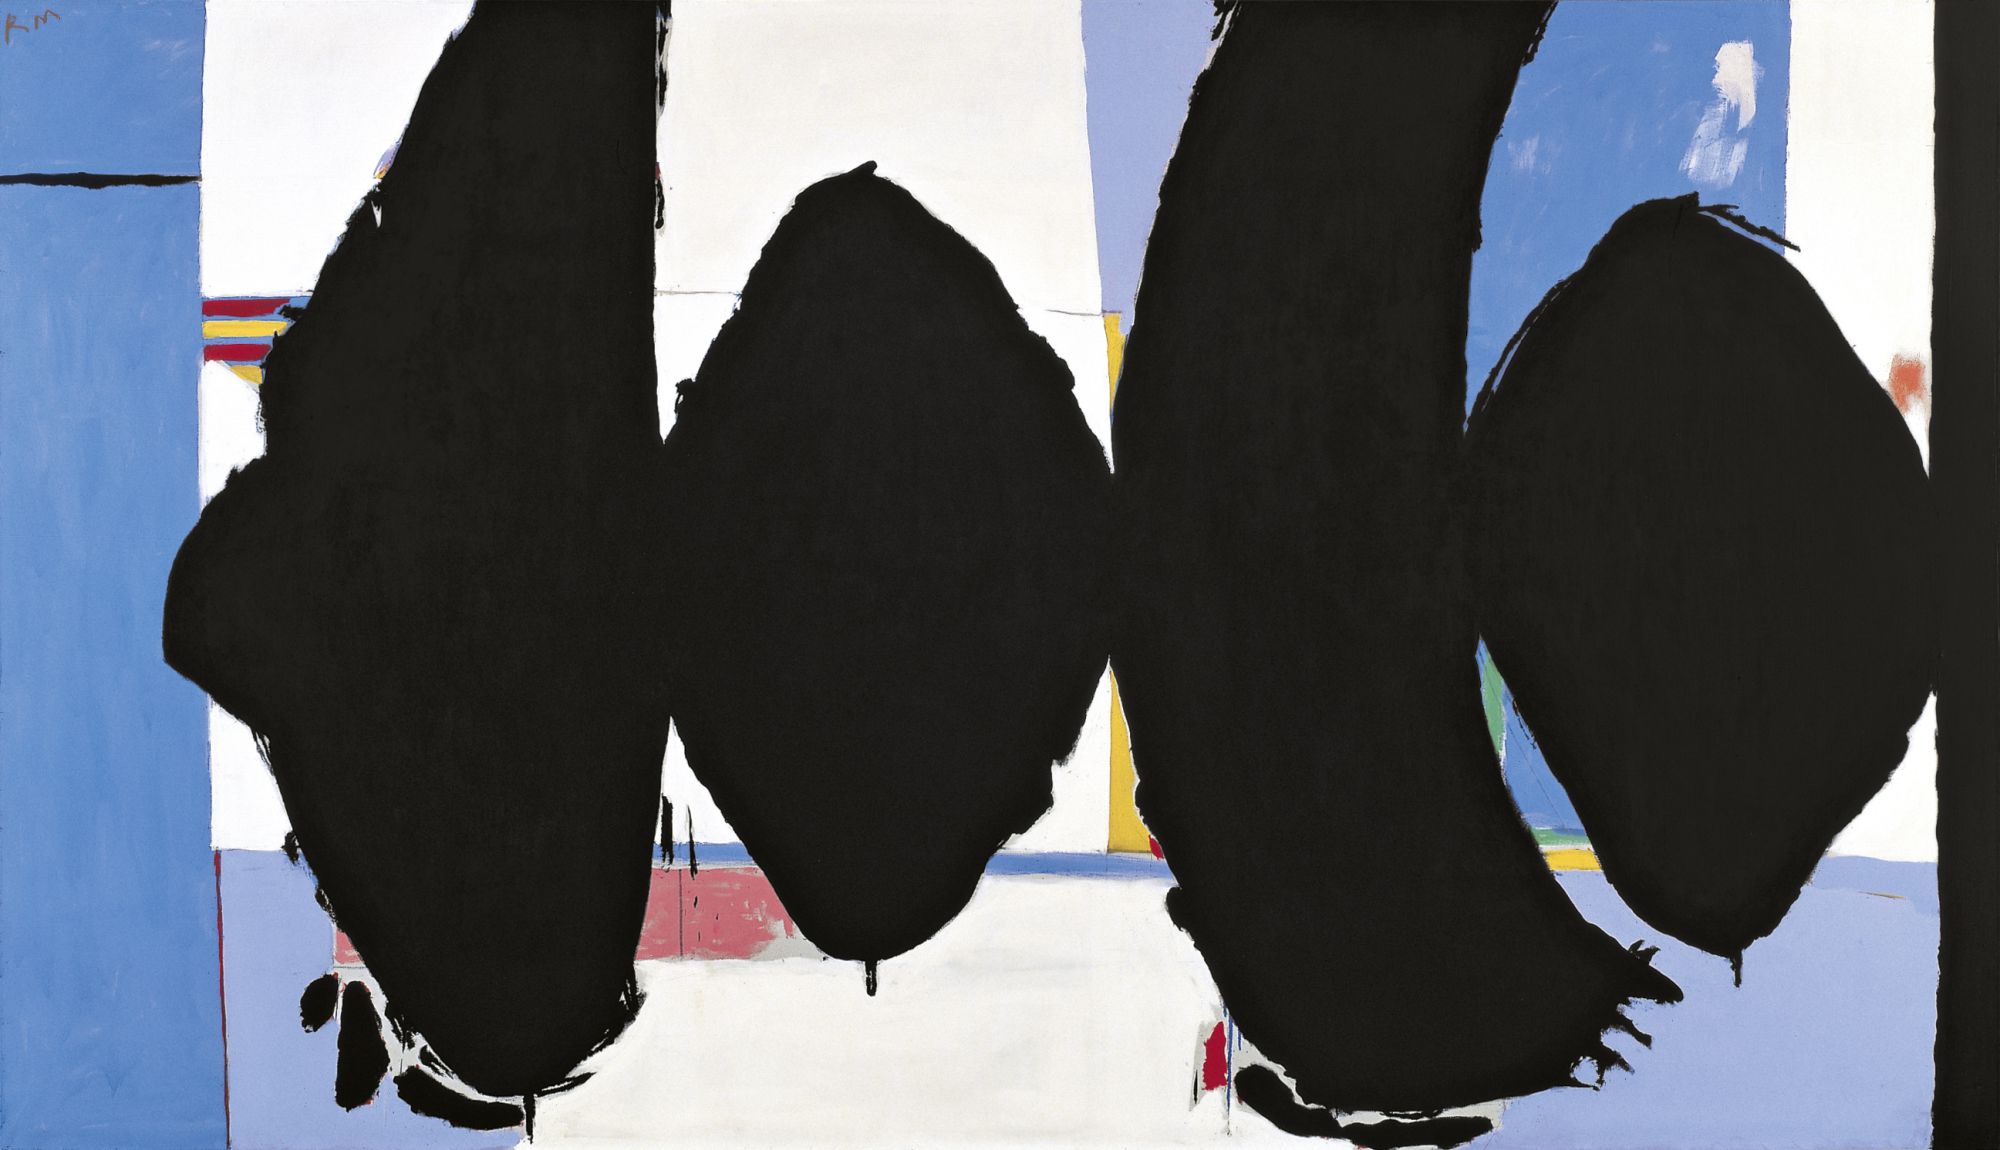 Elegy to the Spanish Republic No. 108 (The Barcelona Elegy), 1966, oil and acrylic on canvas, 84 ✕ 147 in. (213.4 ✕ 373.4 cm)